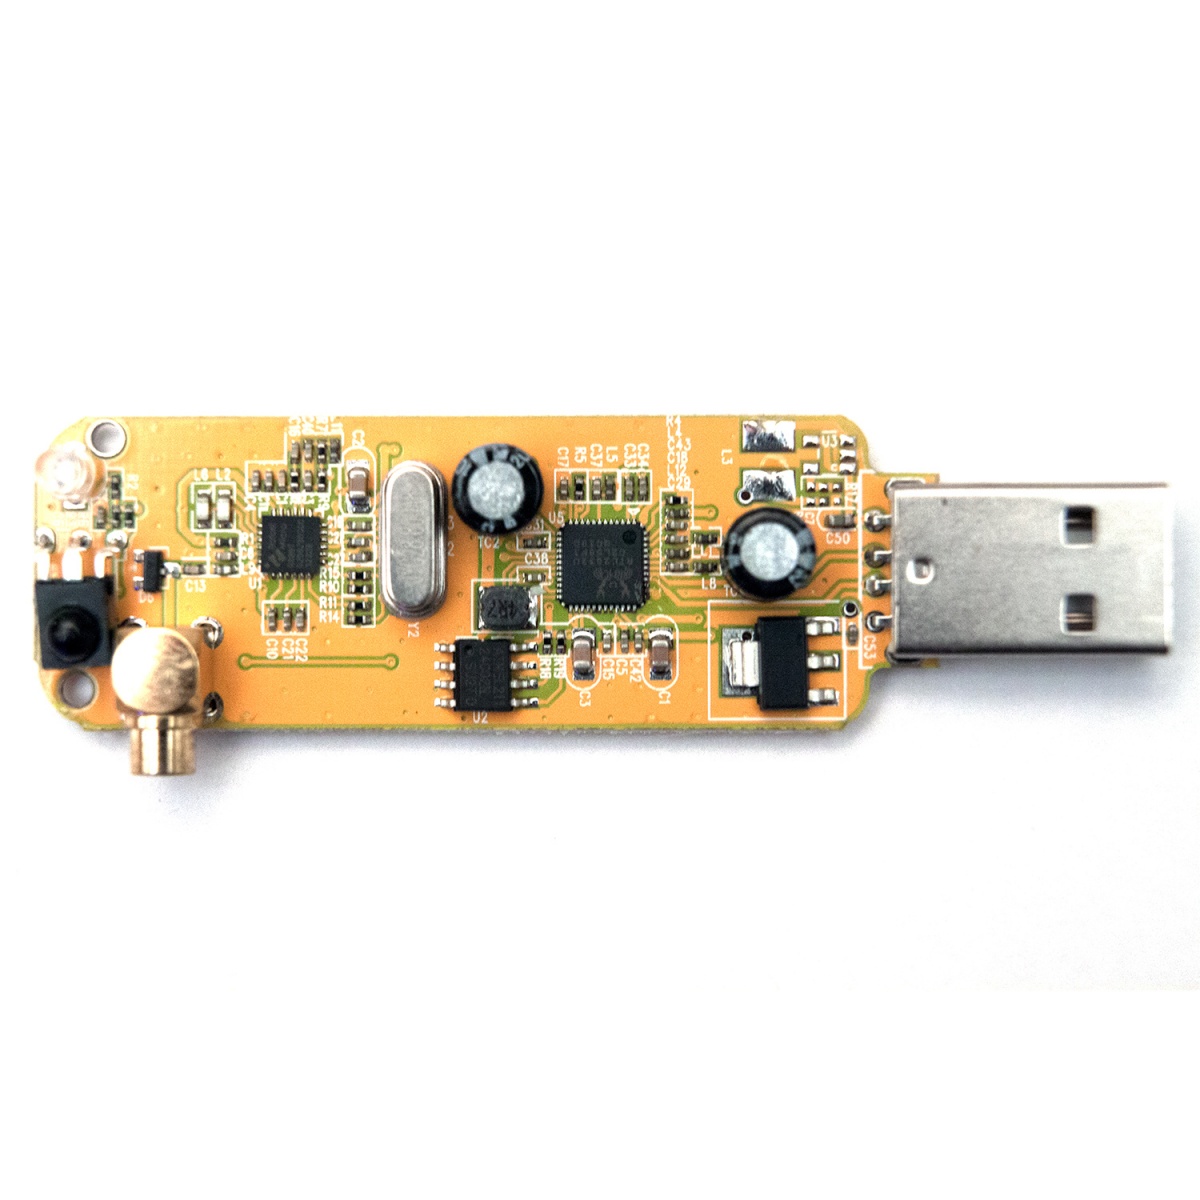 Nooelec NESDR Mini USB RTL-SDR & ADS-B Receiver Set, RTL2832U & R820T  Tuner, MCX Input. Low-Cost Software Defined Radio Compatible with Many SDR